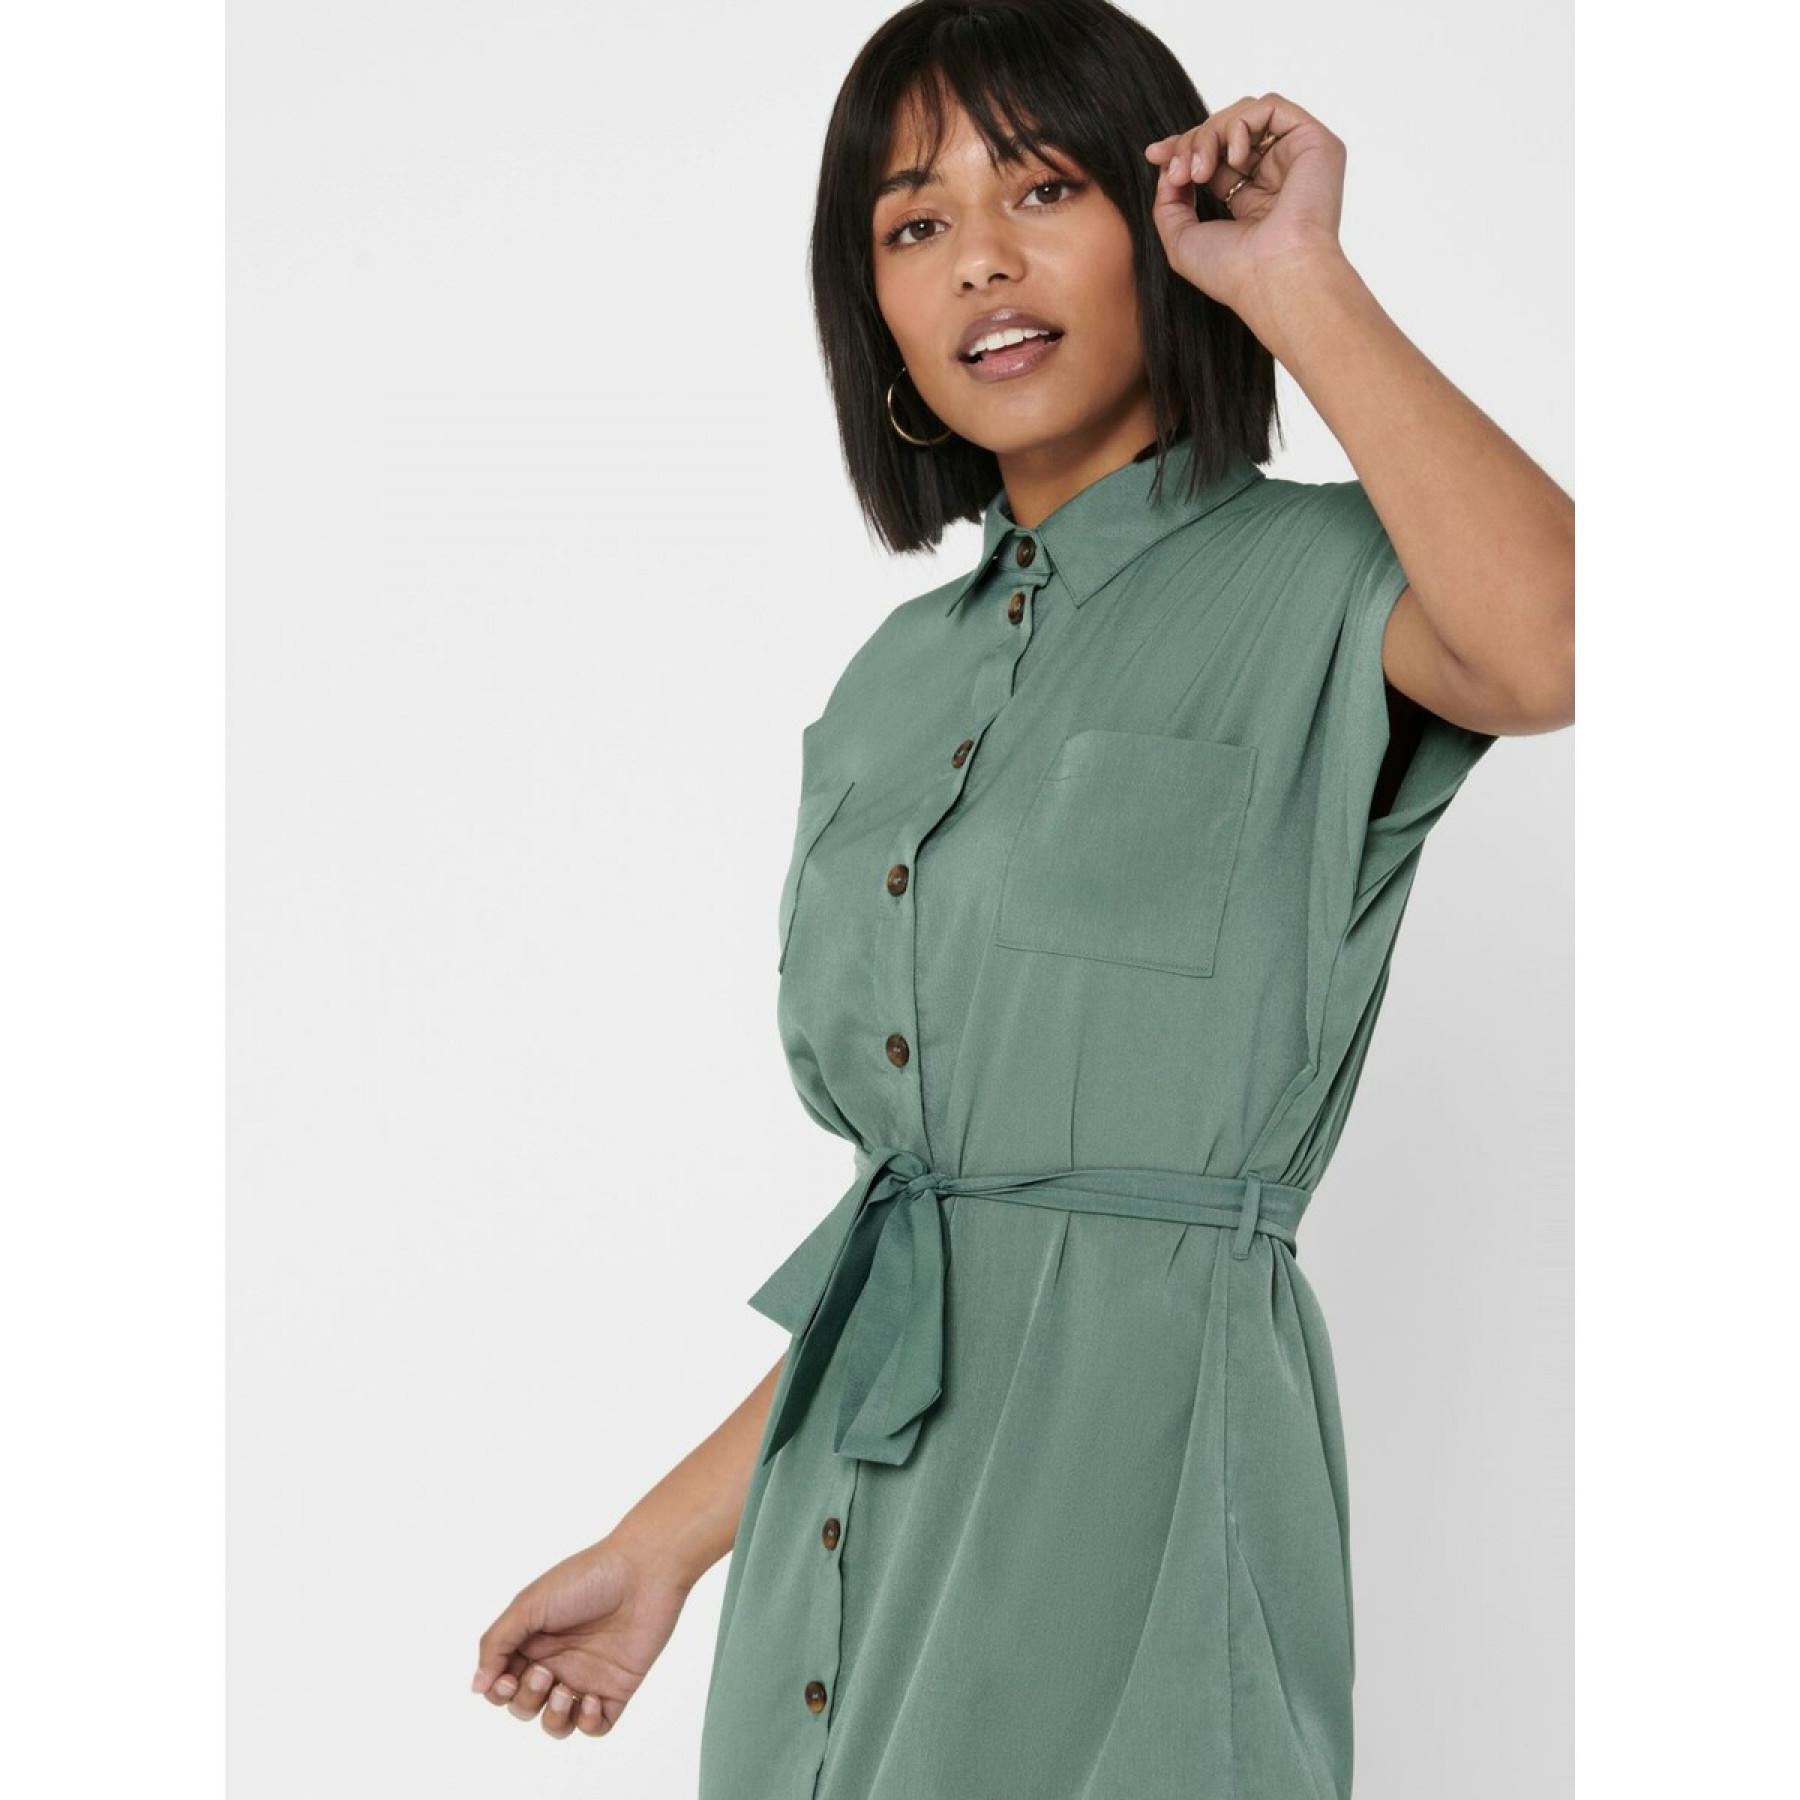 Women's shirt dress Only Hannover